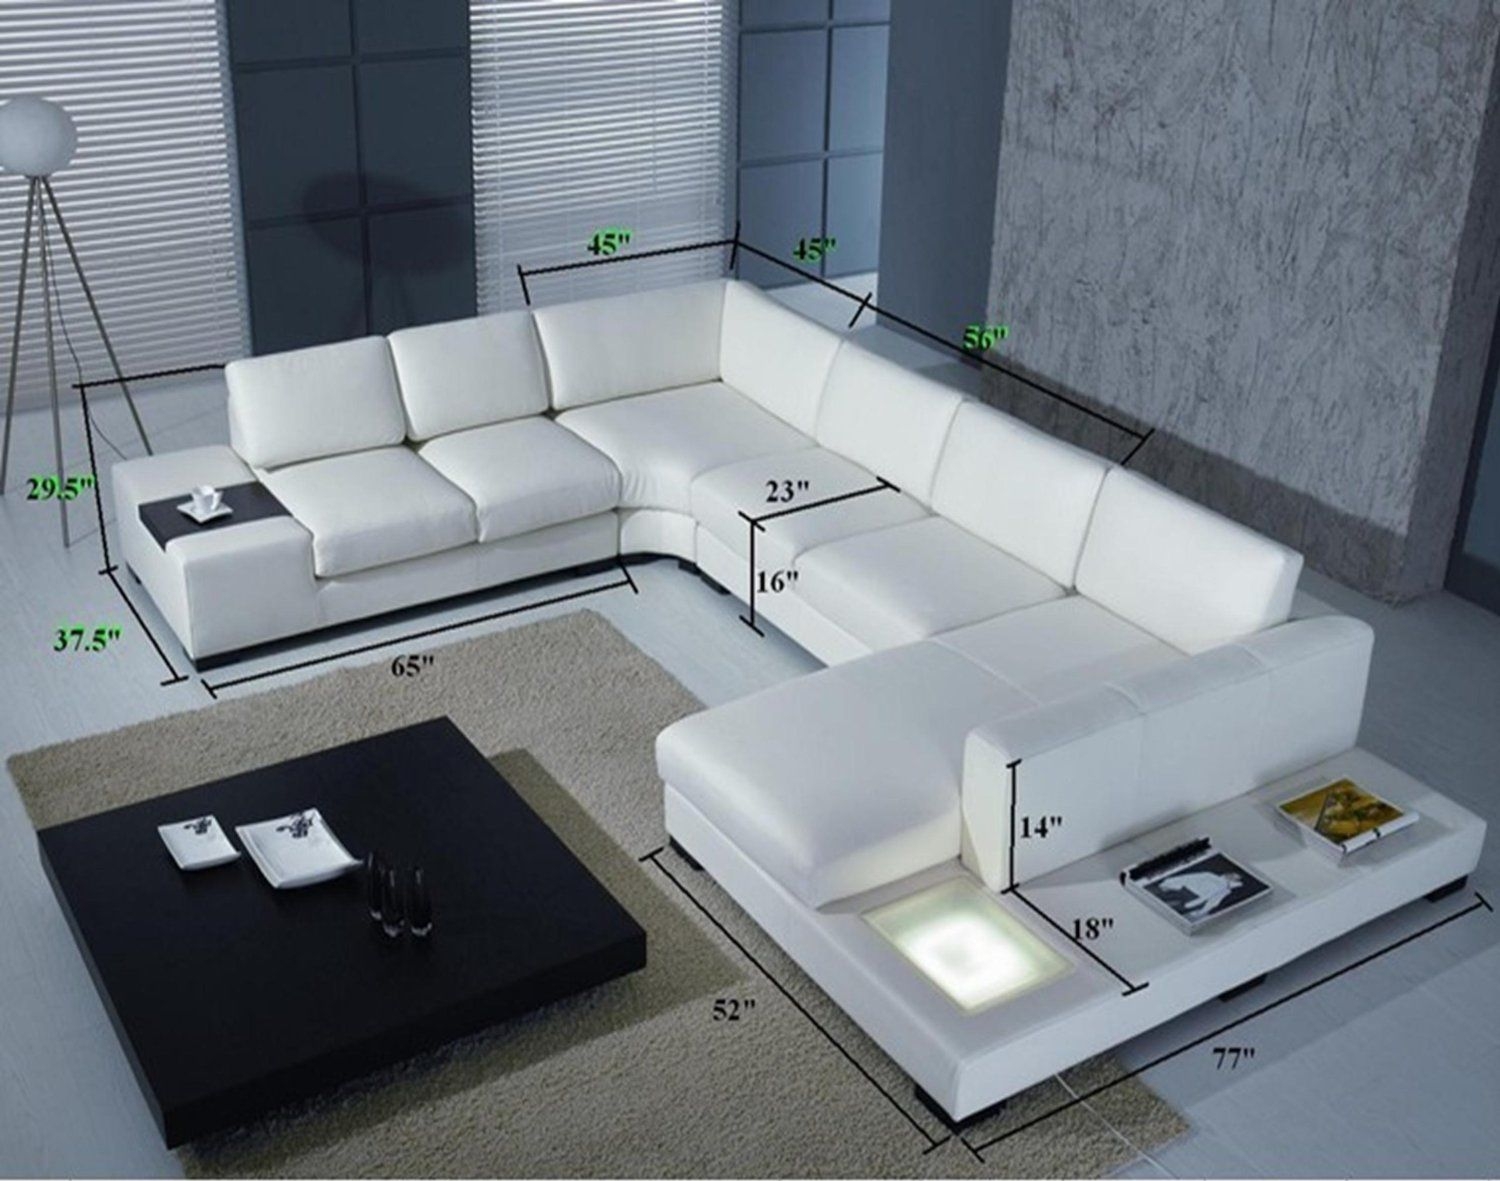 2PC Modern Contemporary white Leather Sectional Sofa #1701 Short version 